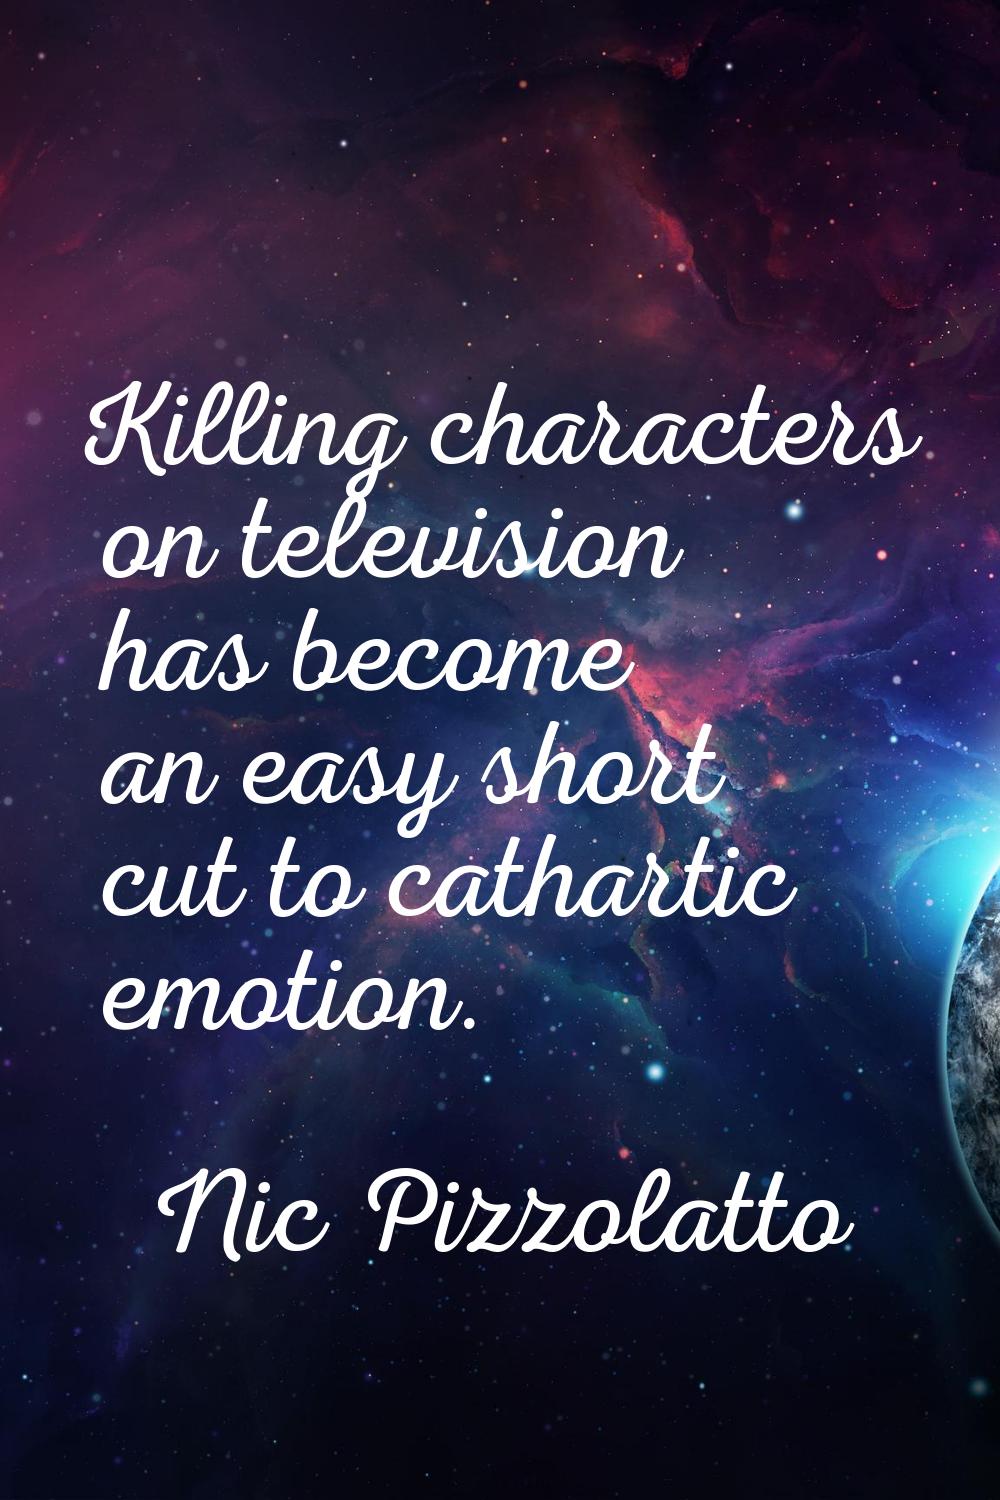 Killing characters on television has become an easy short cut to cathartic emotion.